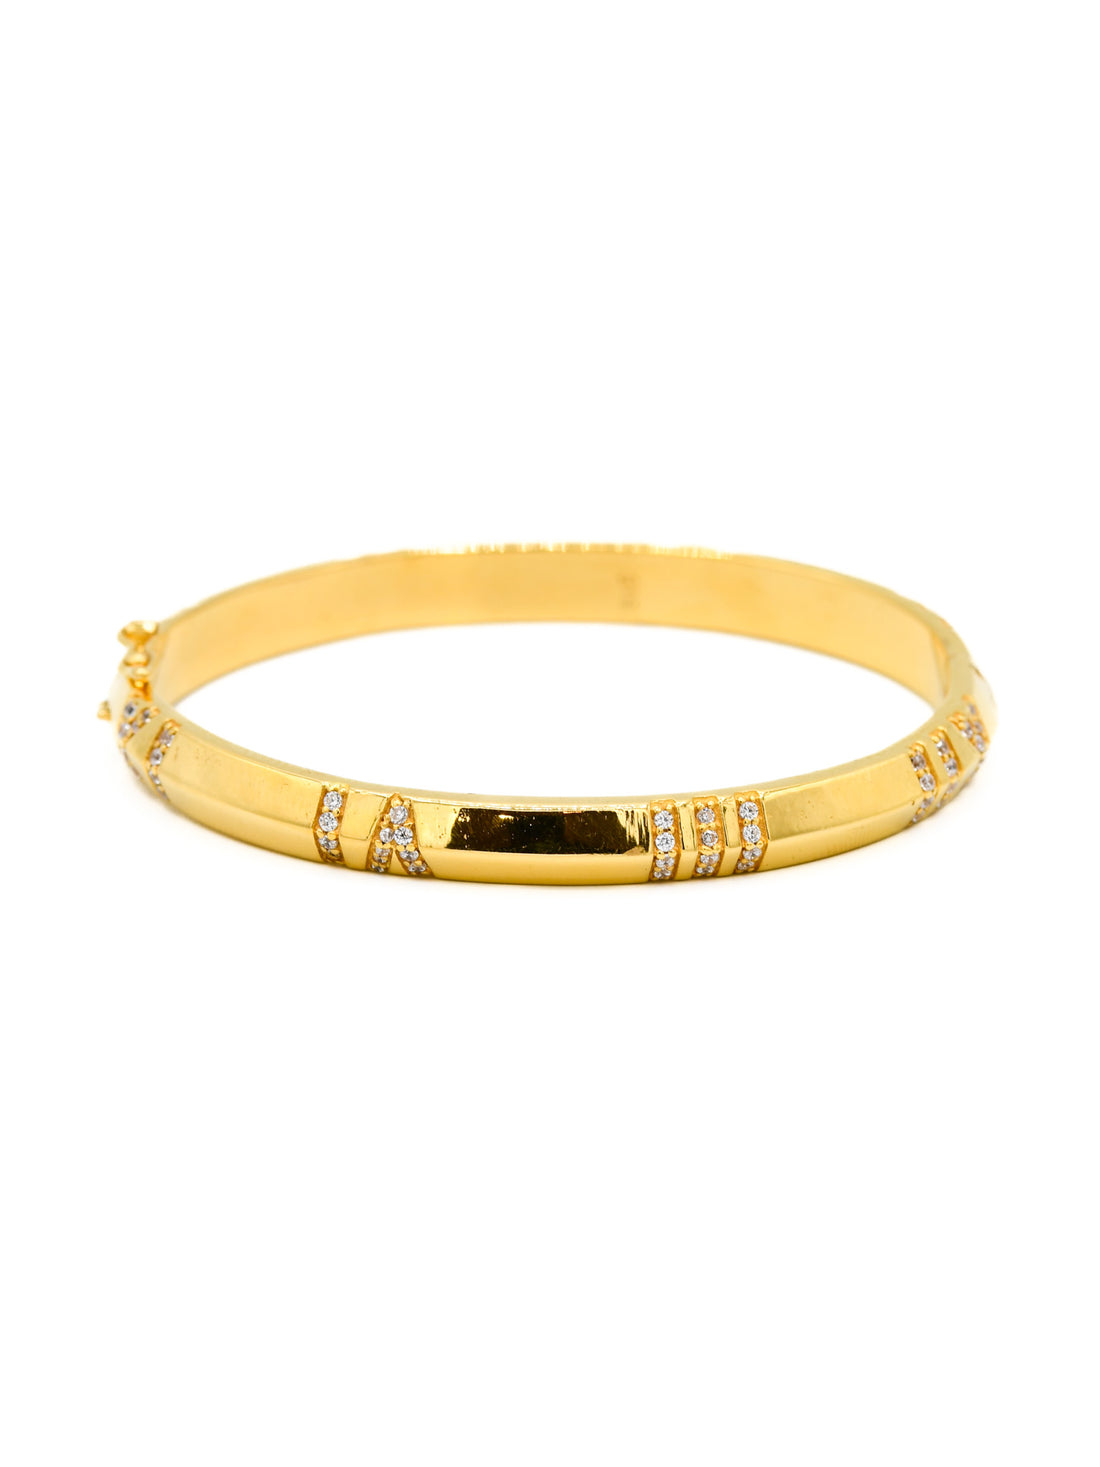 22ct Gold CZ Oval Shaped Bangle - Roop Darshan